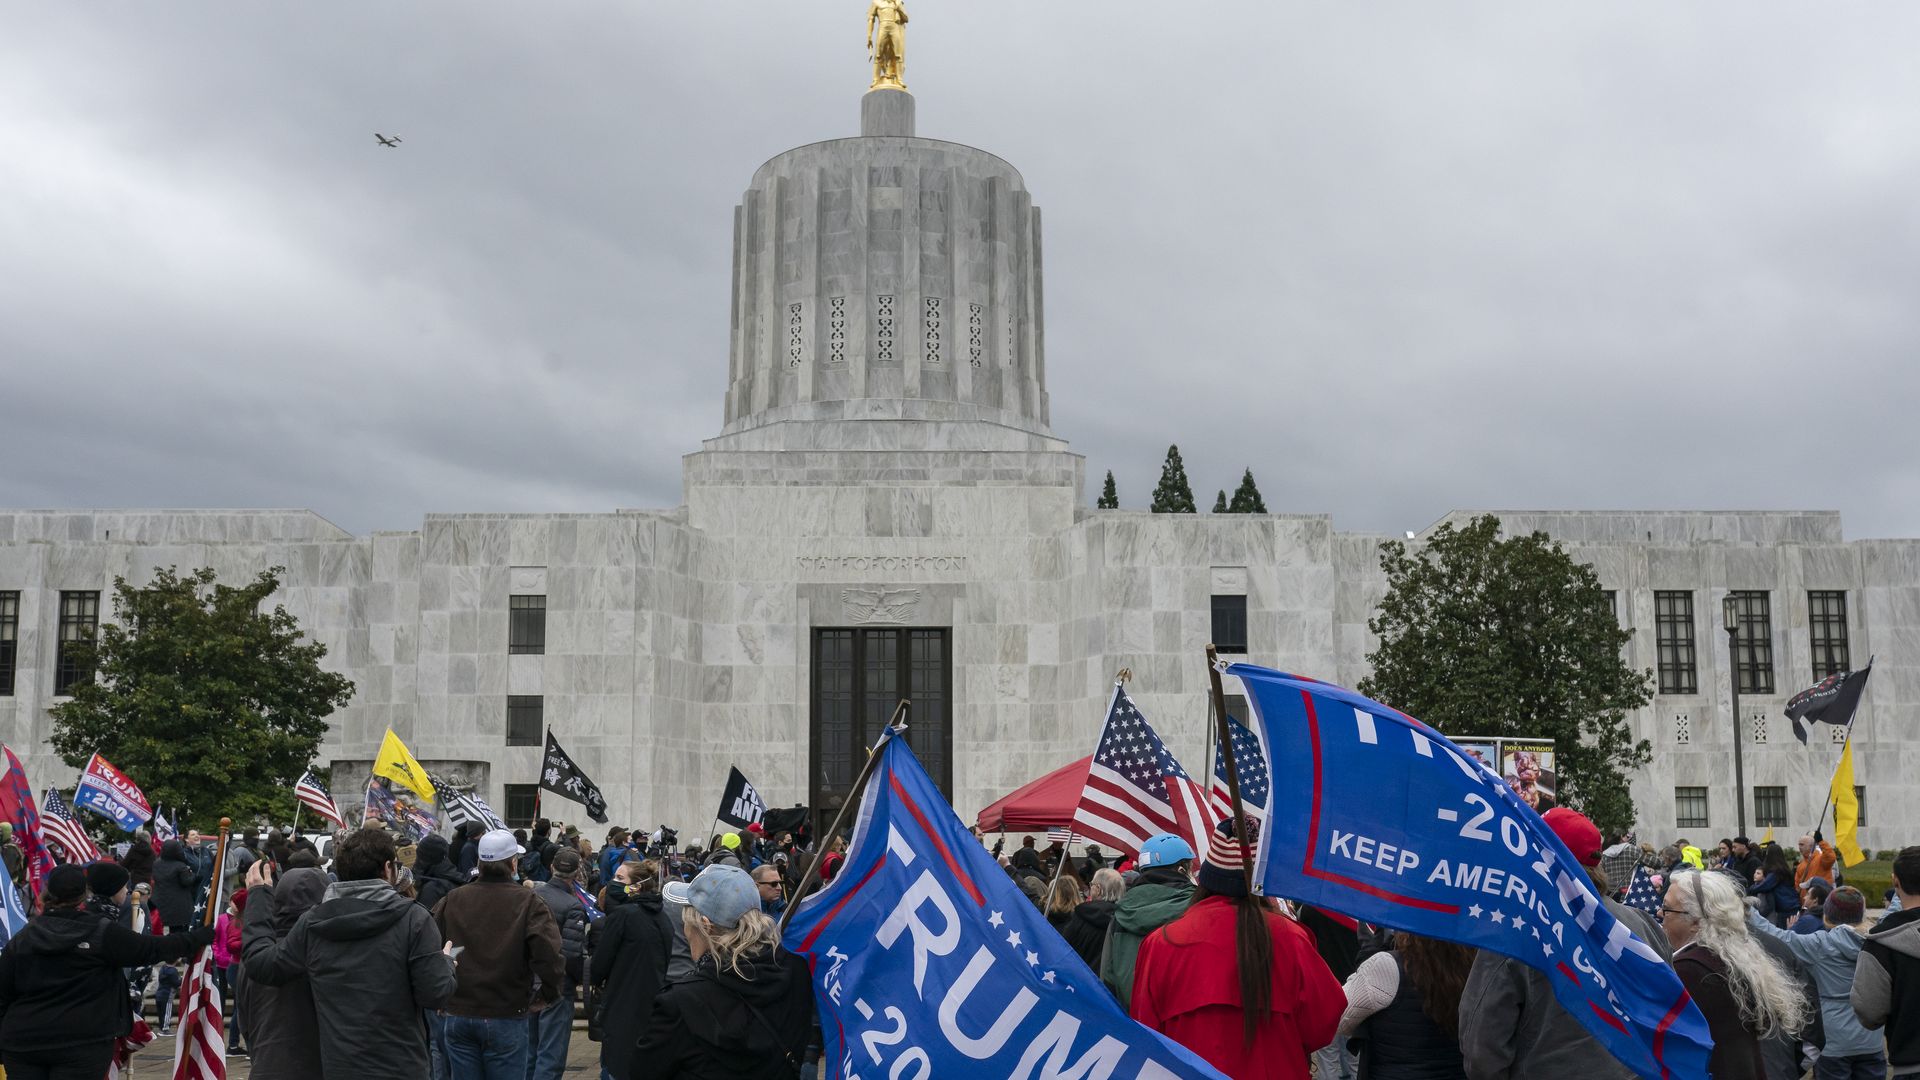 Picture of the Oregon State Capitol building in January, with pro-Trump protestors standing outside.